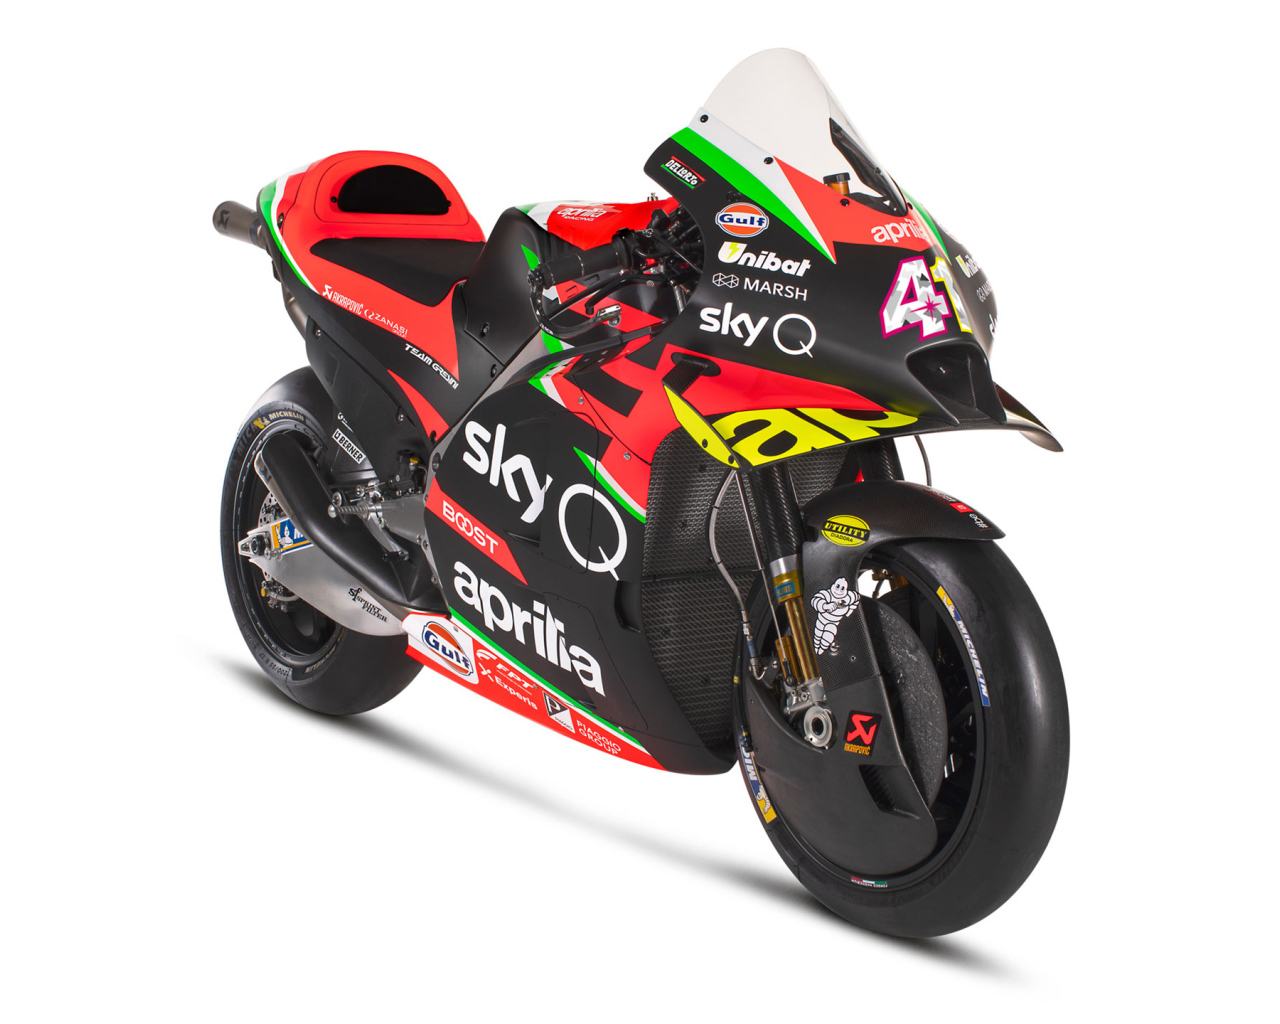 2020 Aprilia RS GP racing motorcycle on a white background